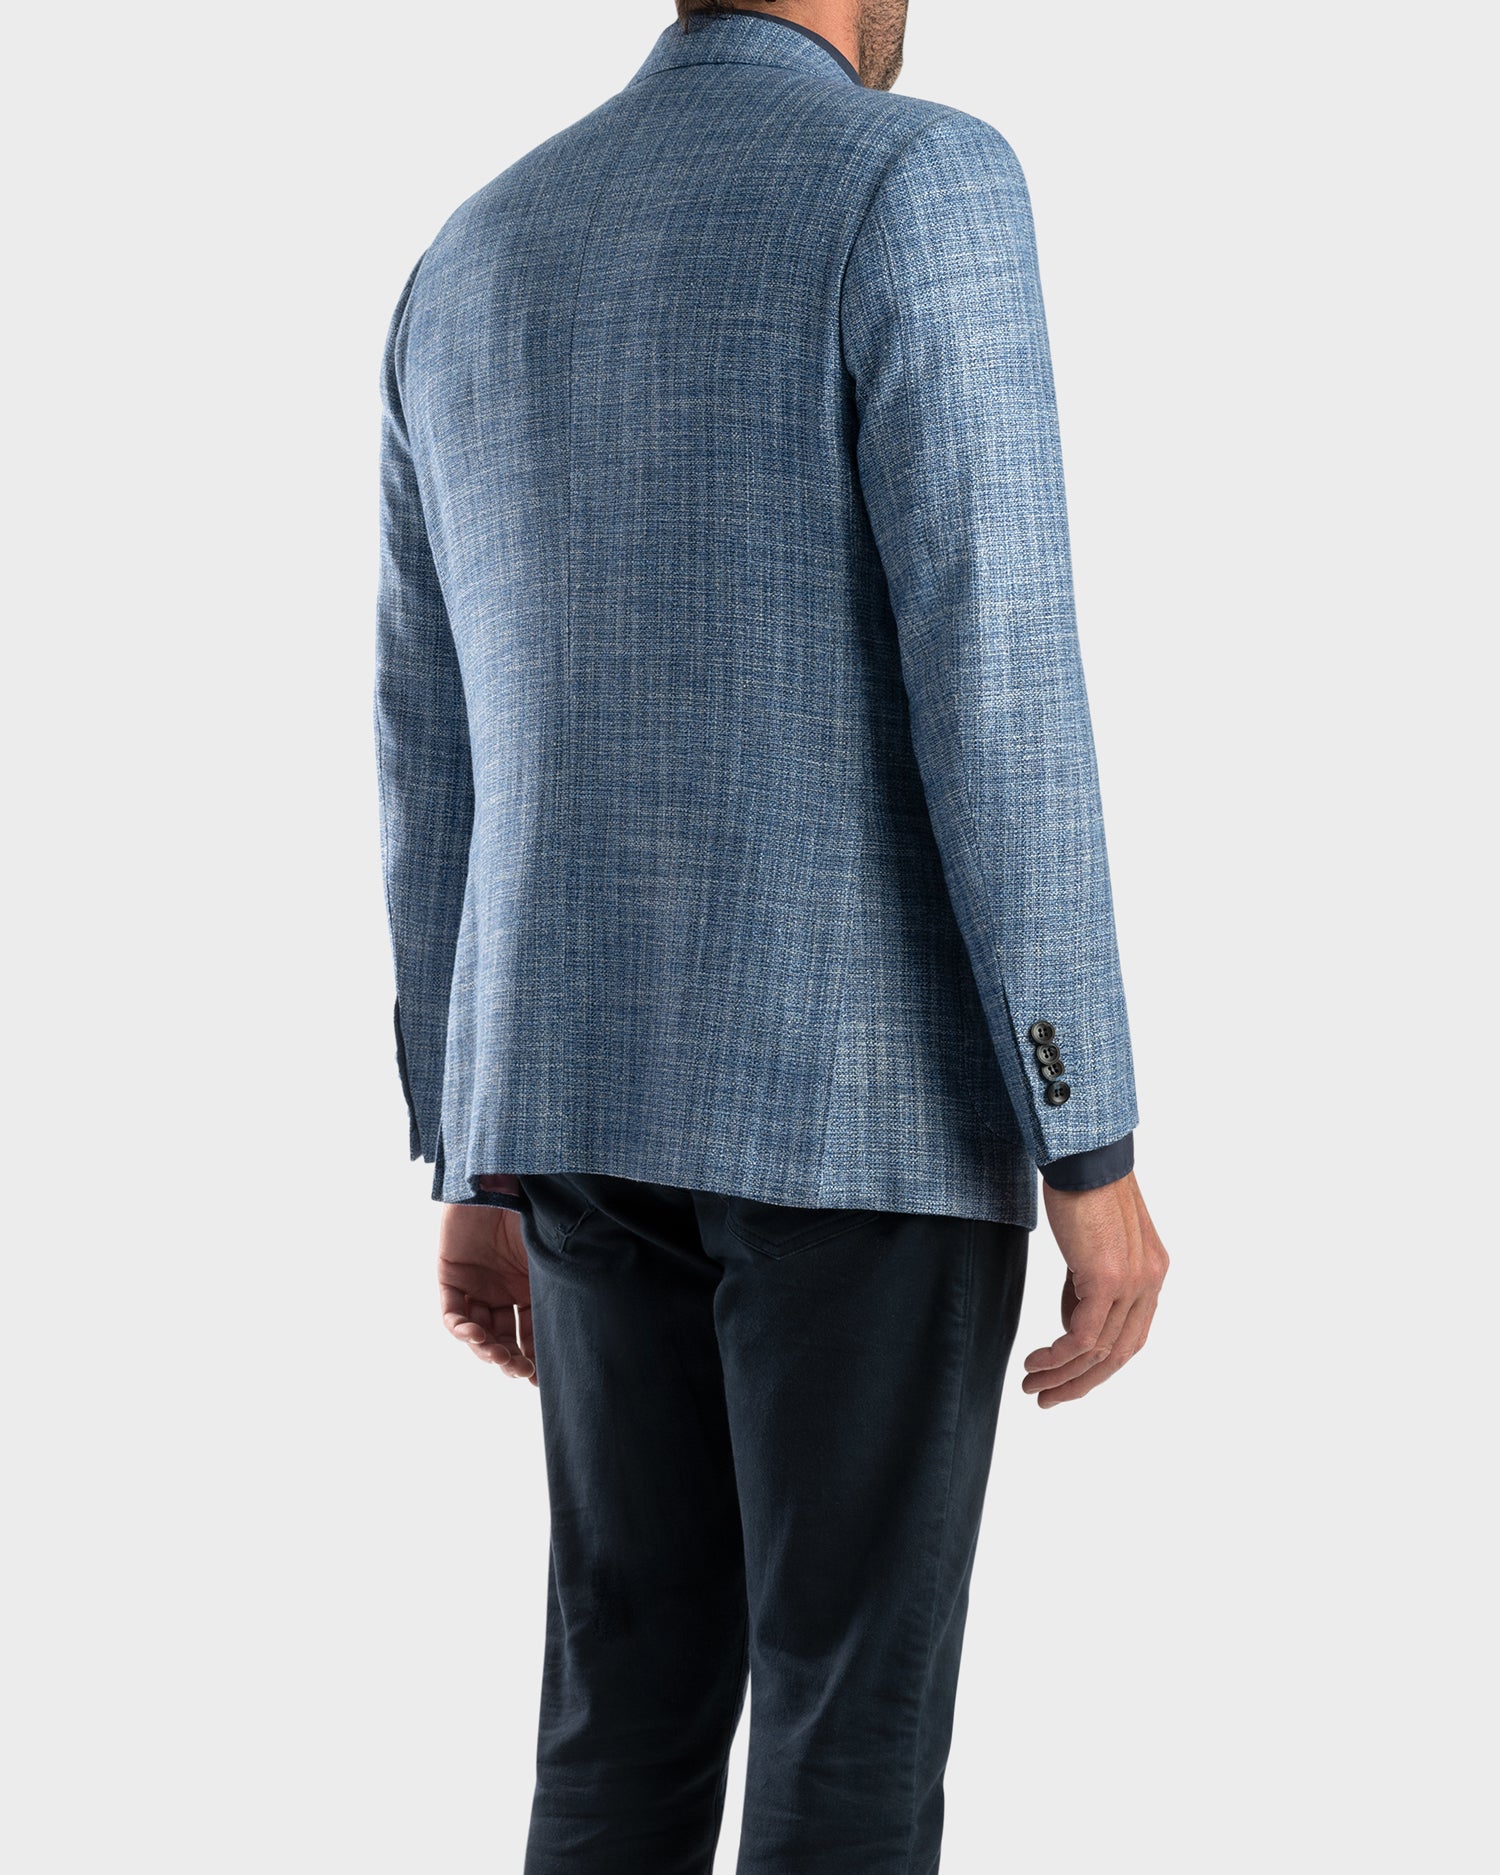 Light Blue Woven Microstructure Cashmere Sports Jacket